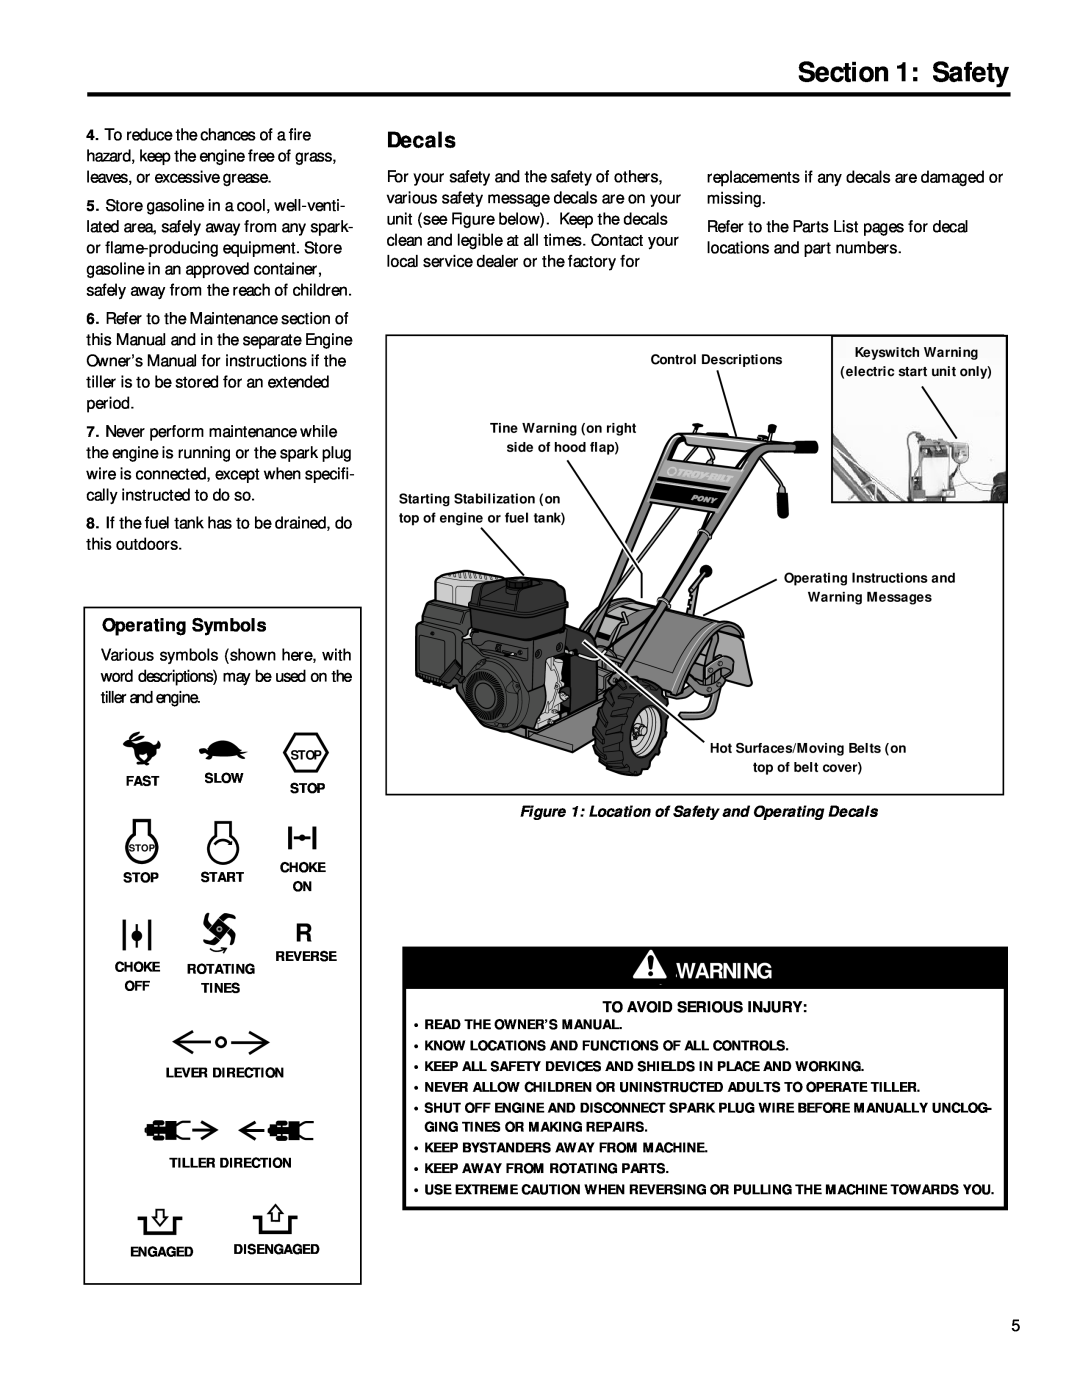 Troy-Bilt 12211, 12212 owner manual Operating Symbols, Location of Safety and Operating Decals, To Avoid Serious Injury 